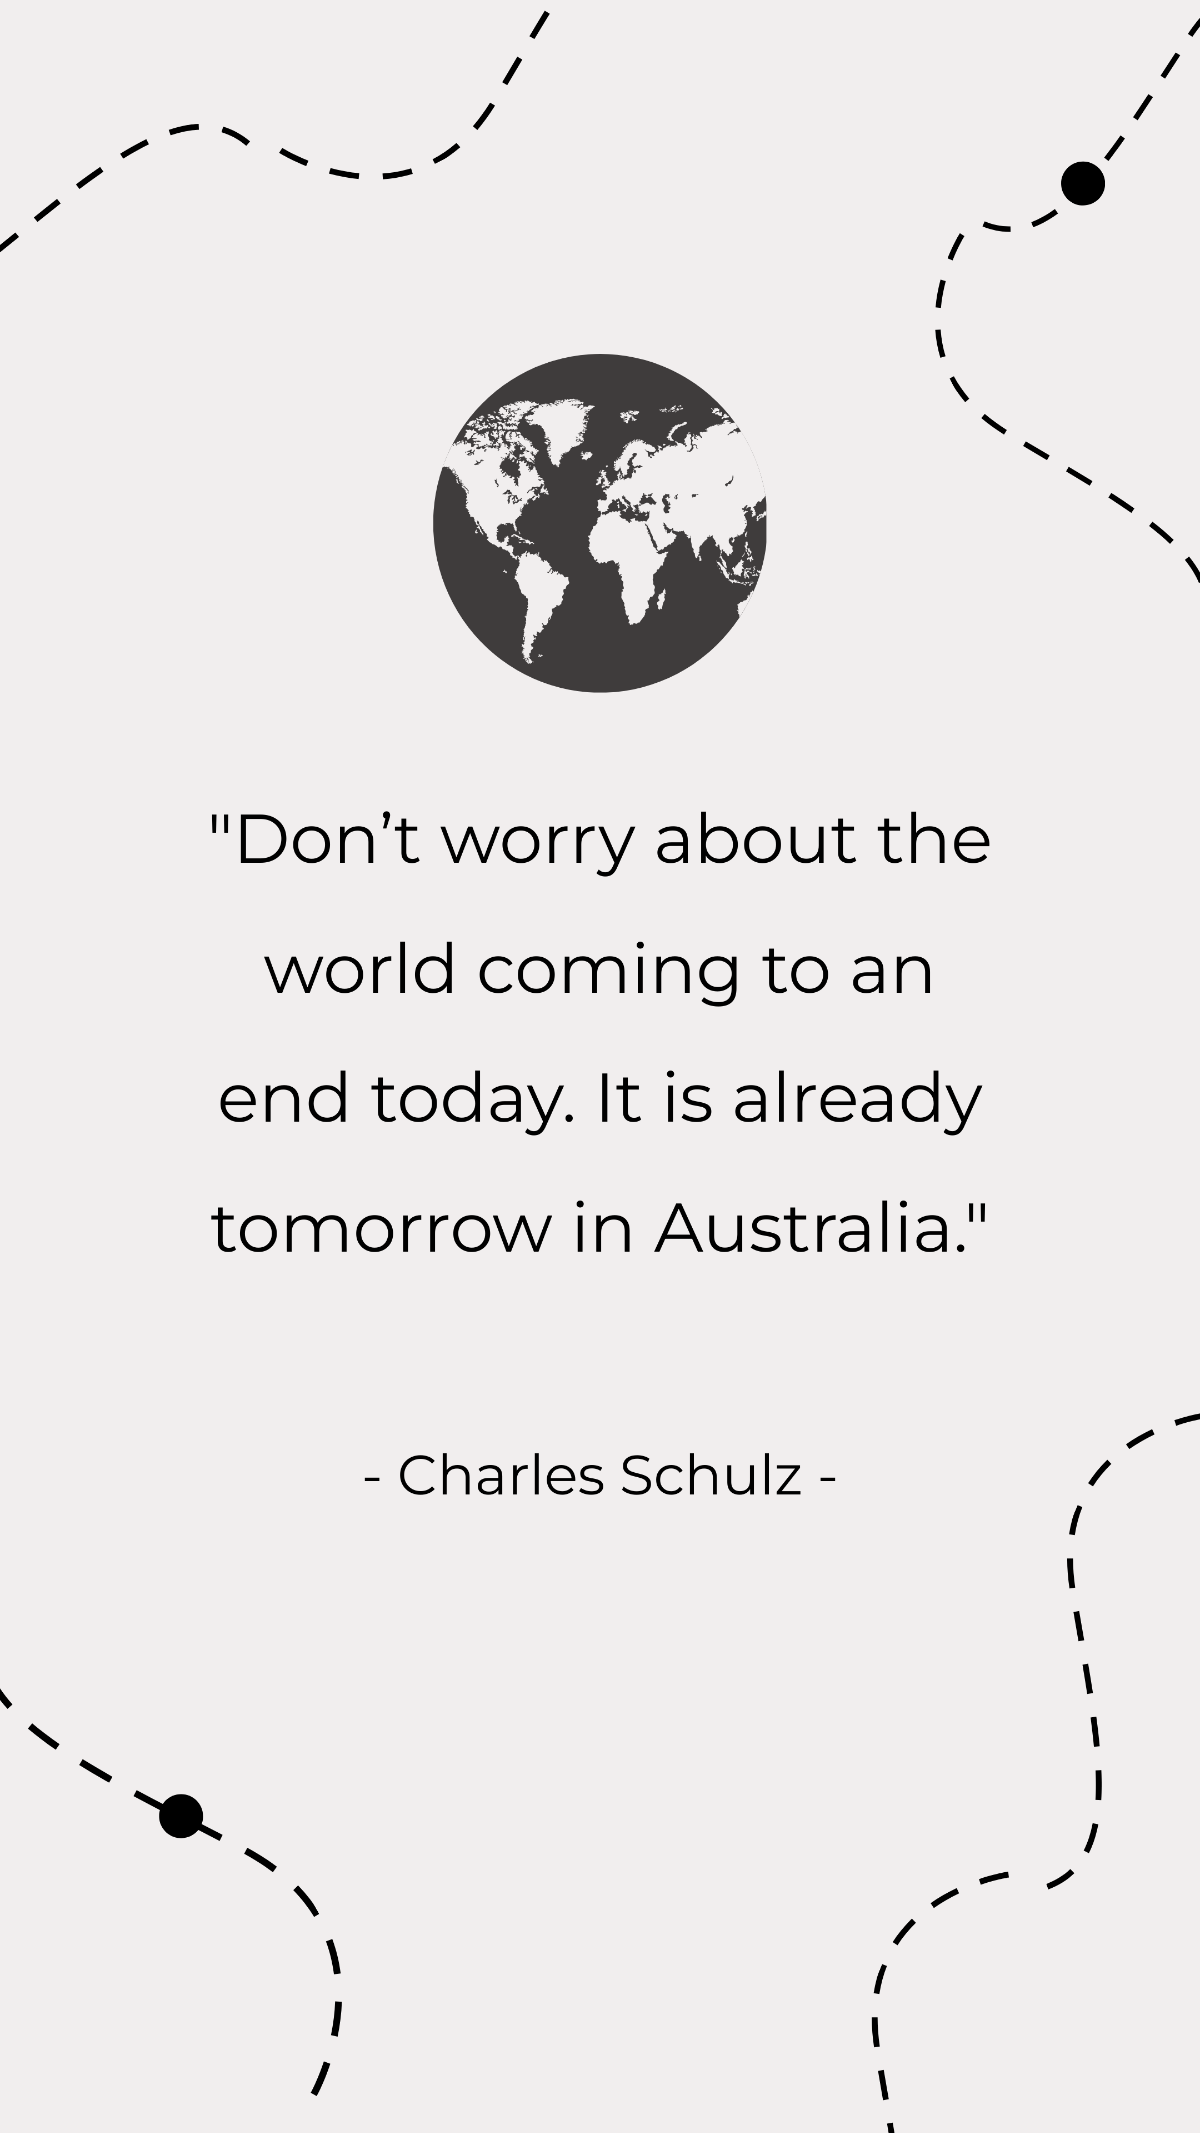 Charles Schulz - Don’t worry about the world coming to an end today. It is already tomorrow in Australia.